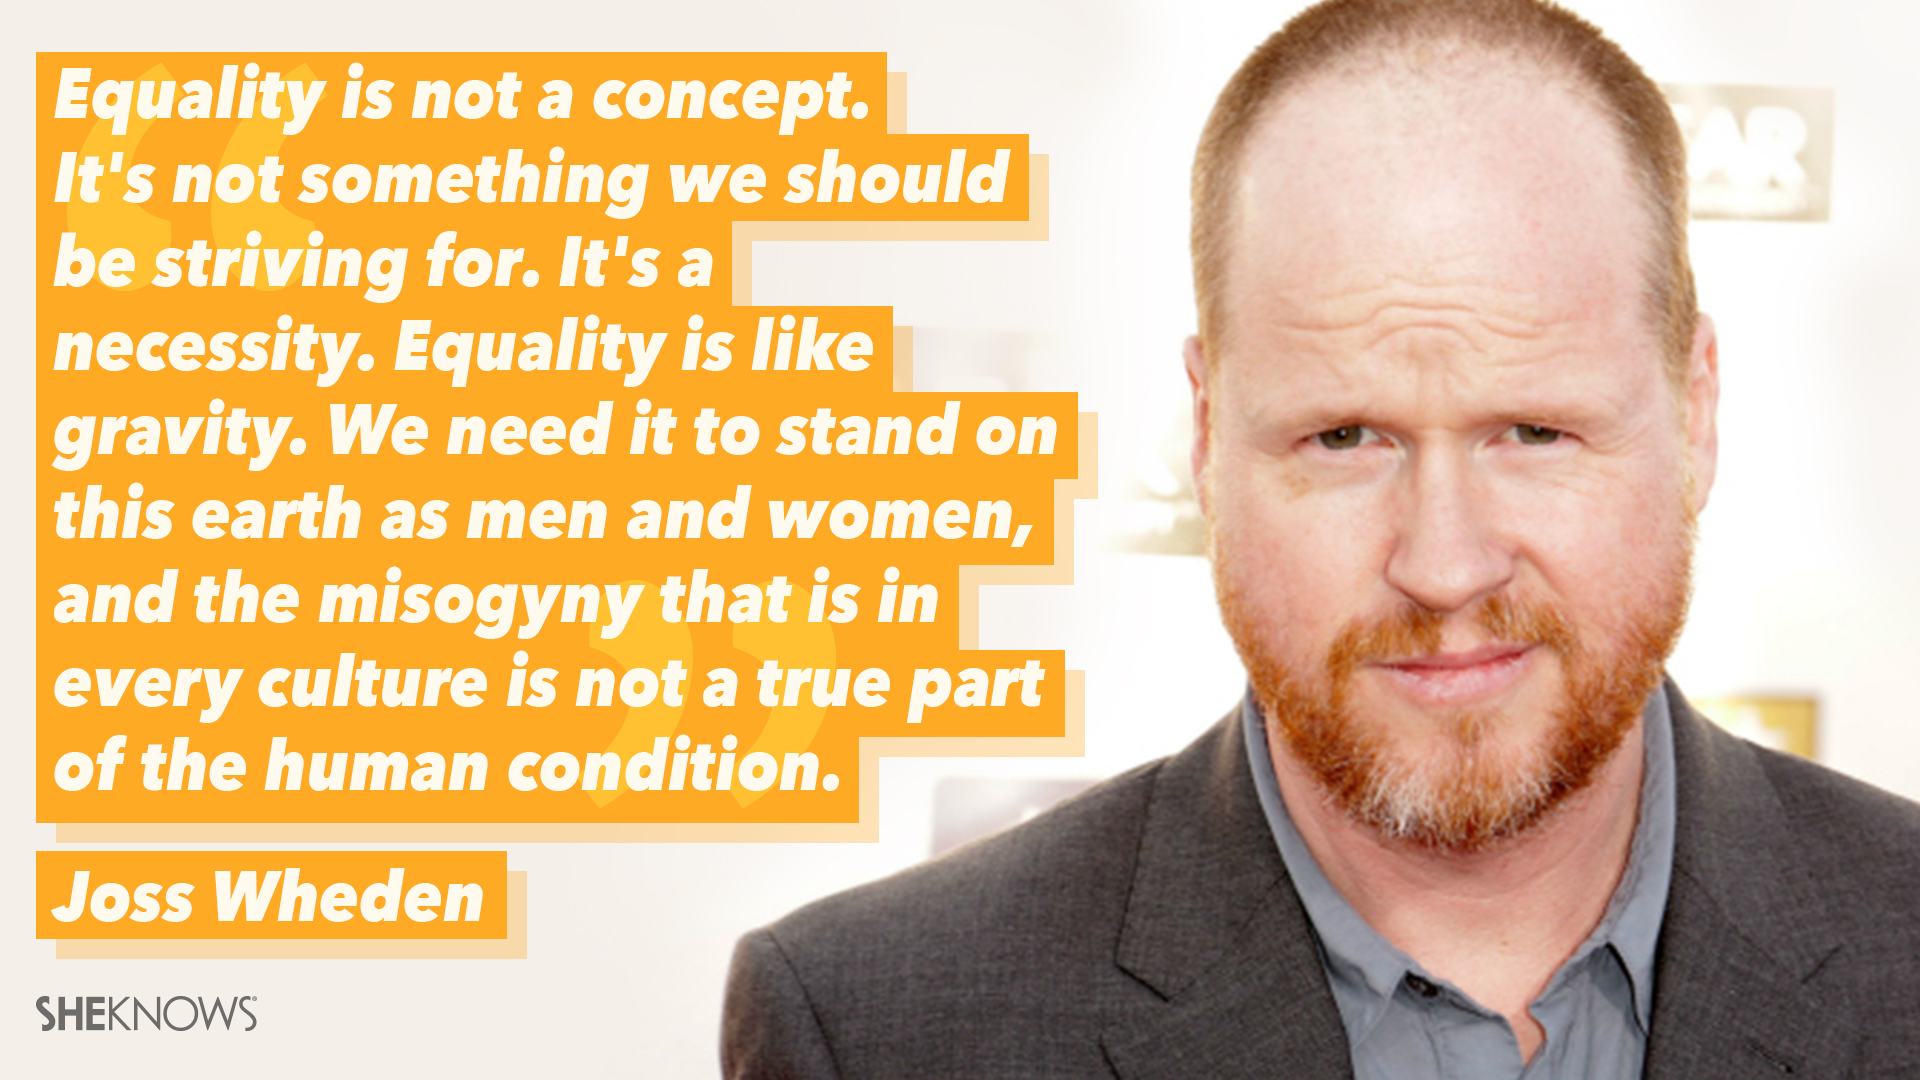 stop me if this starts to sound familiar -- "equality is like gravity. we need it to stand on this earth as men and women, and the misogyny that is in every culture is not a true part of the human condition." -- Joss Whedon